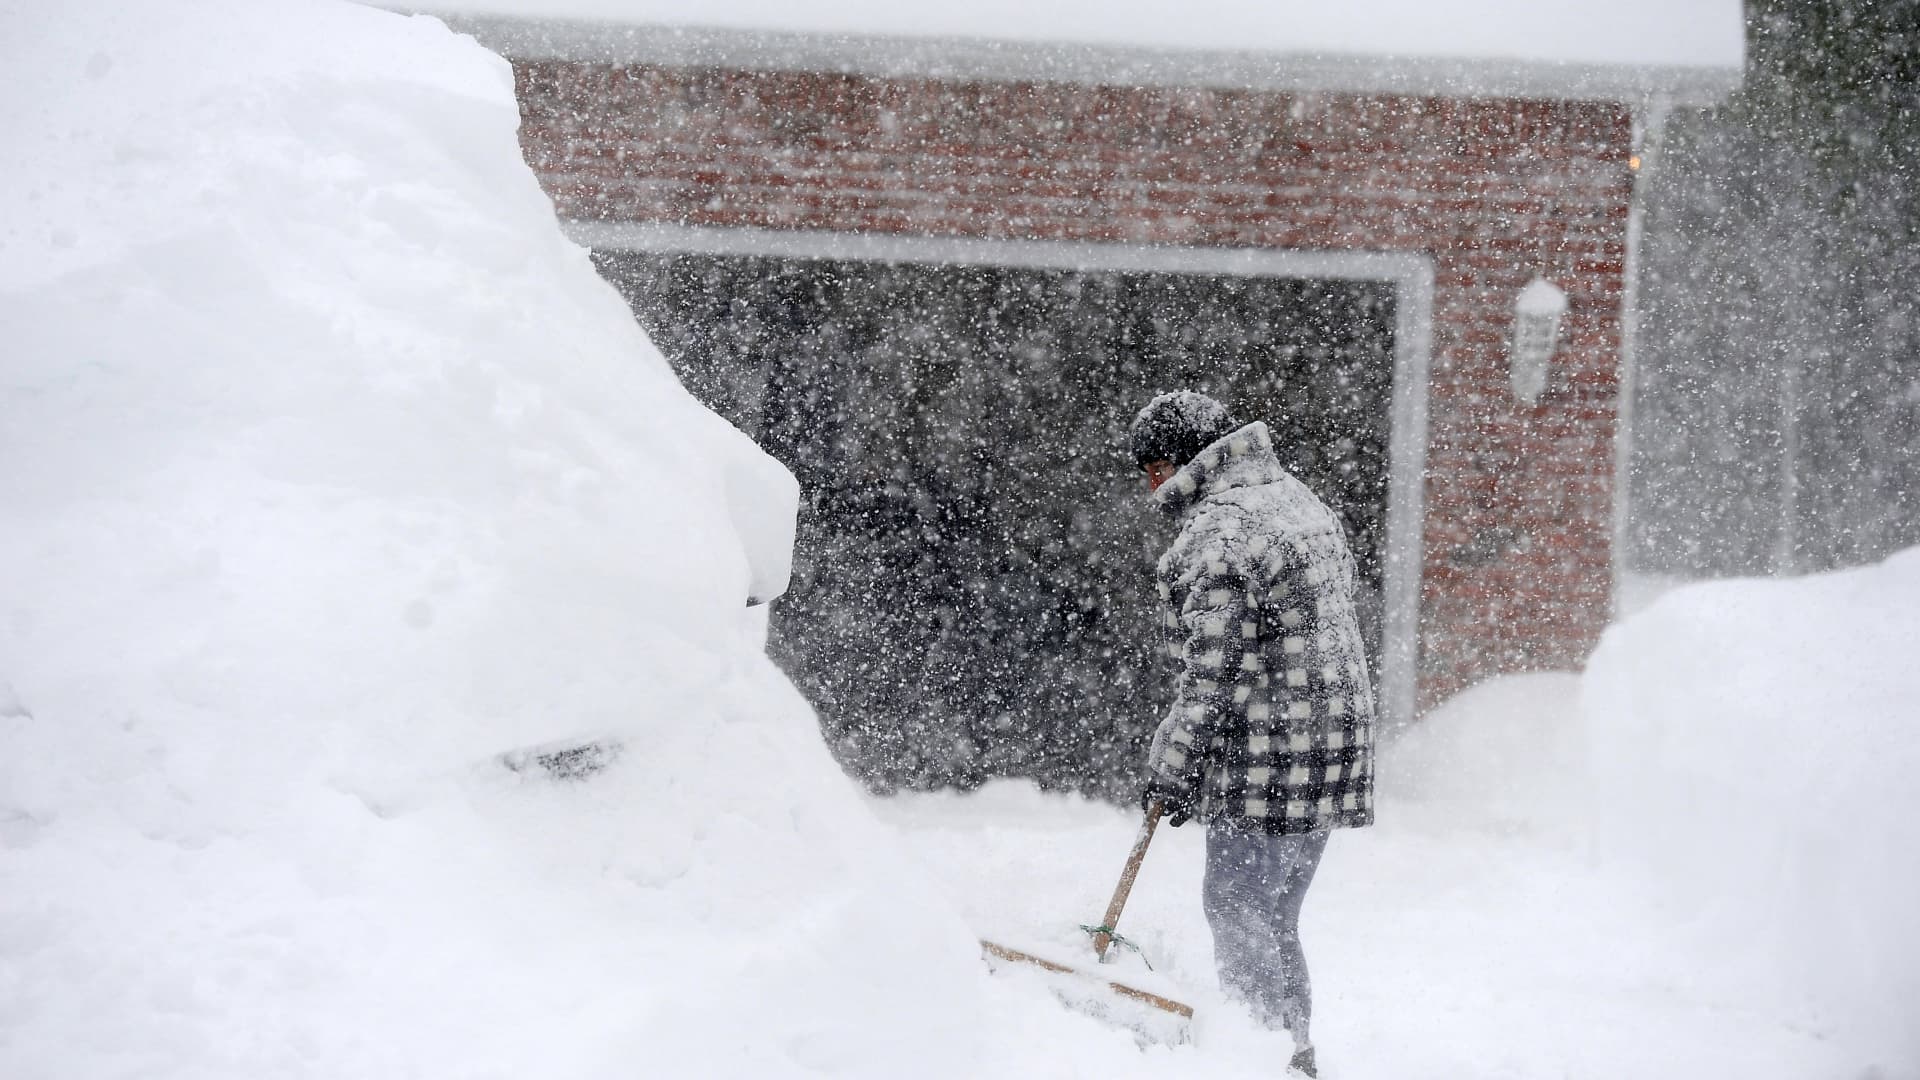 Dangerous lake-effect storm paralyzes parts of New York State with more than five feet of snow